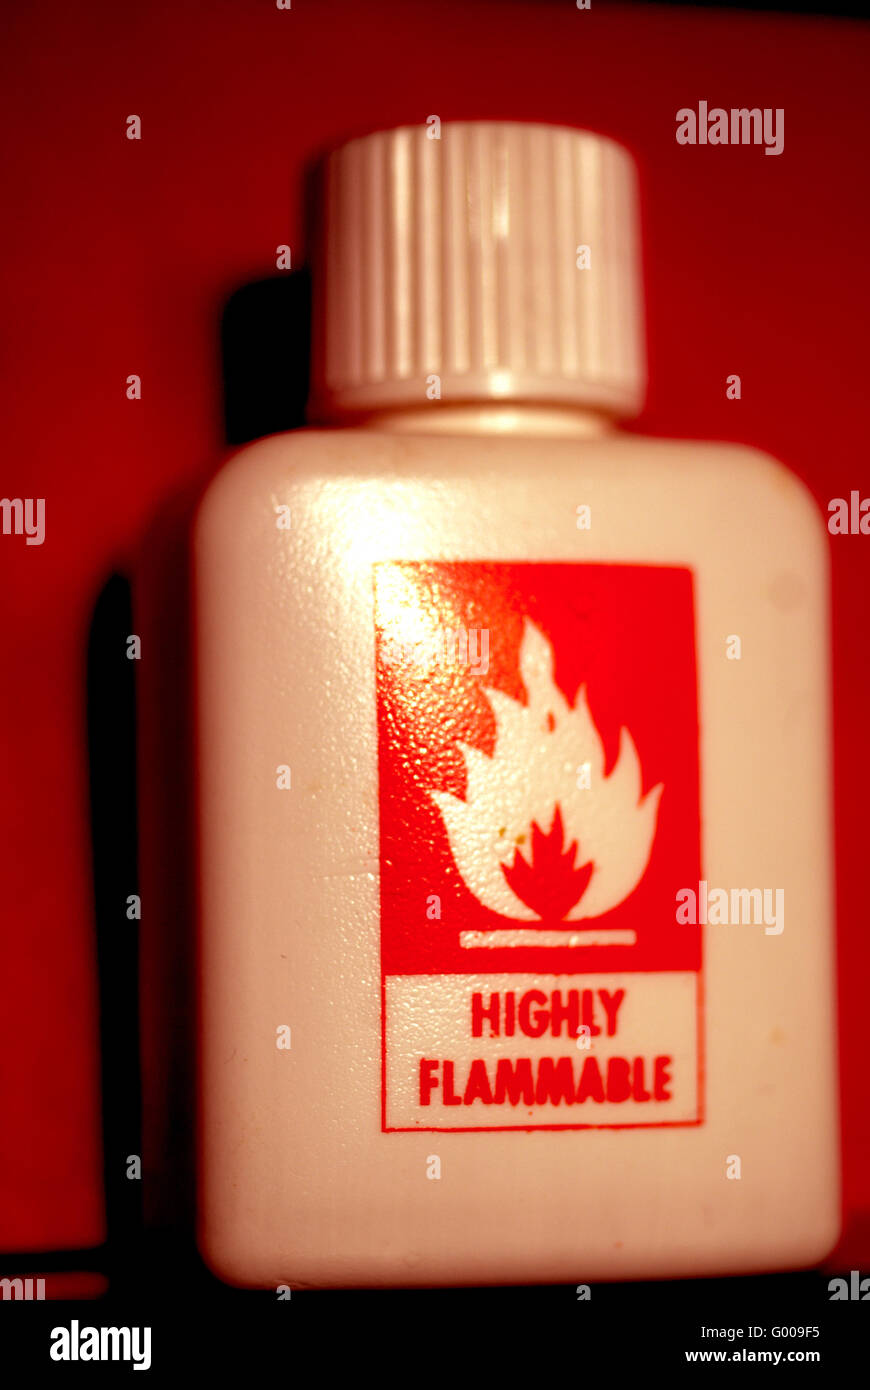 Highly Inflammable liquid in plastic bottle / Warning Stock Photo